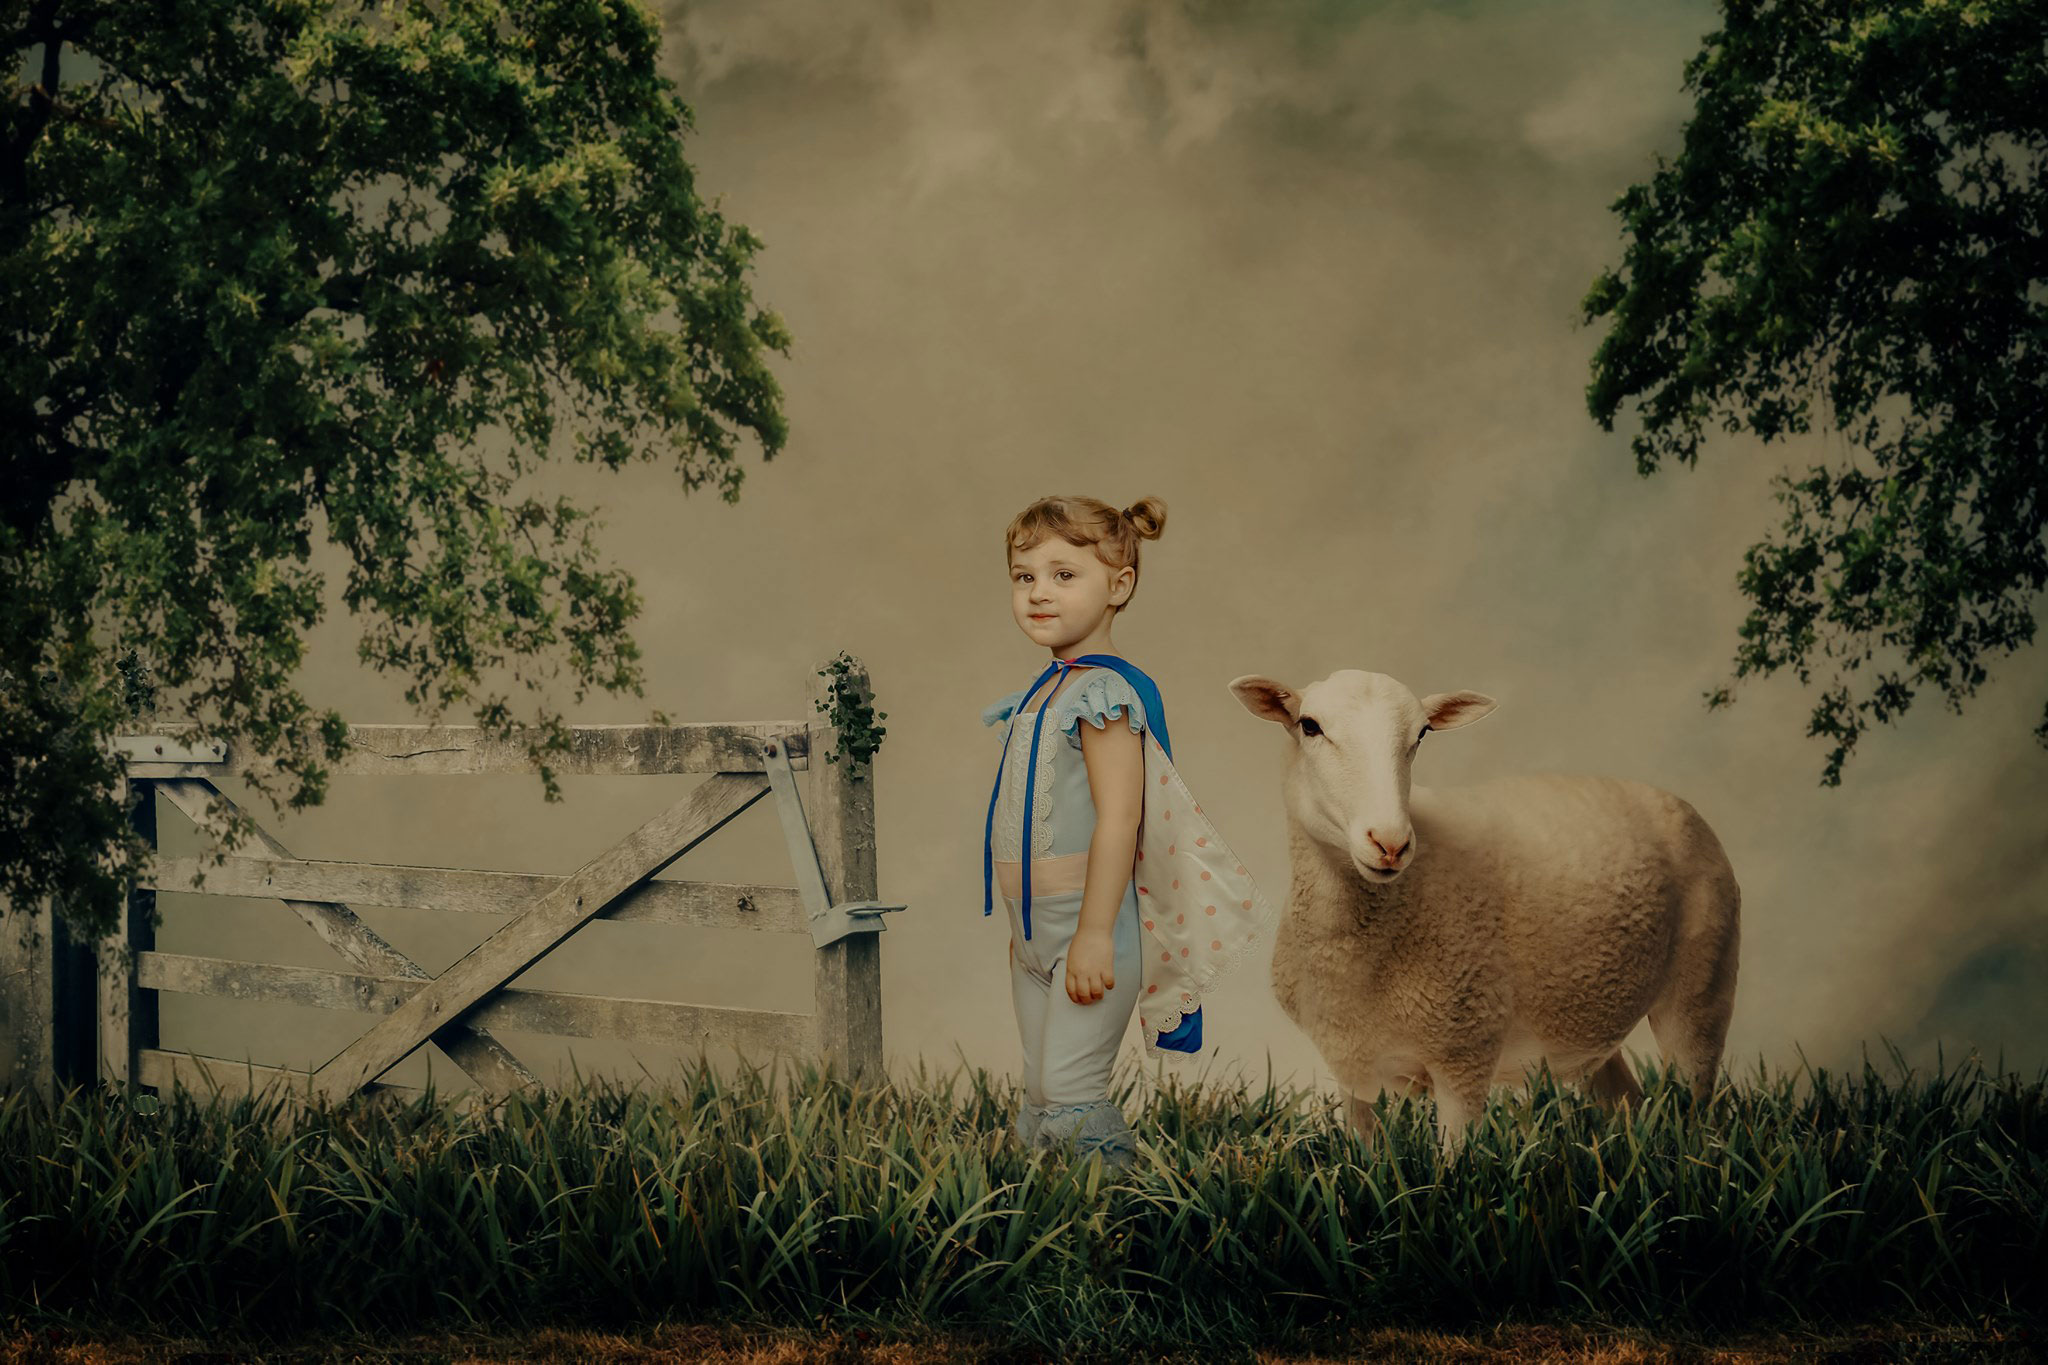 Little girl in a bo peep costume with her sheep by wichita photographer